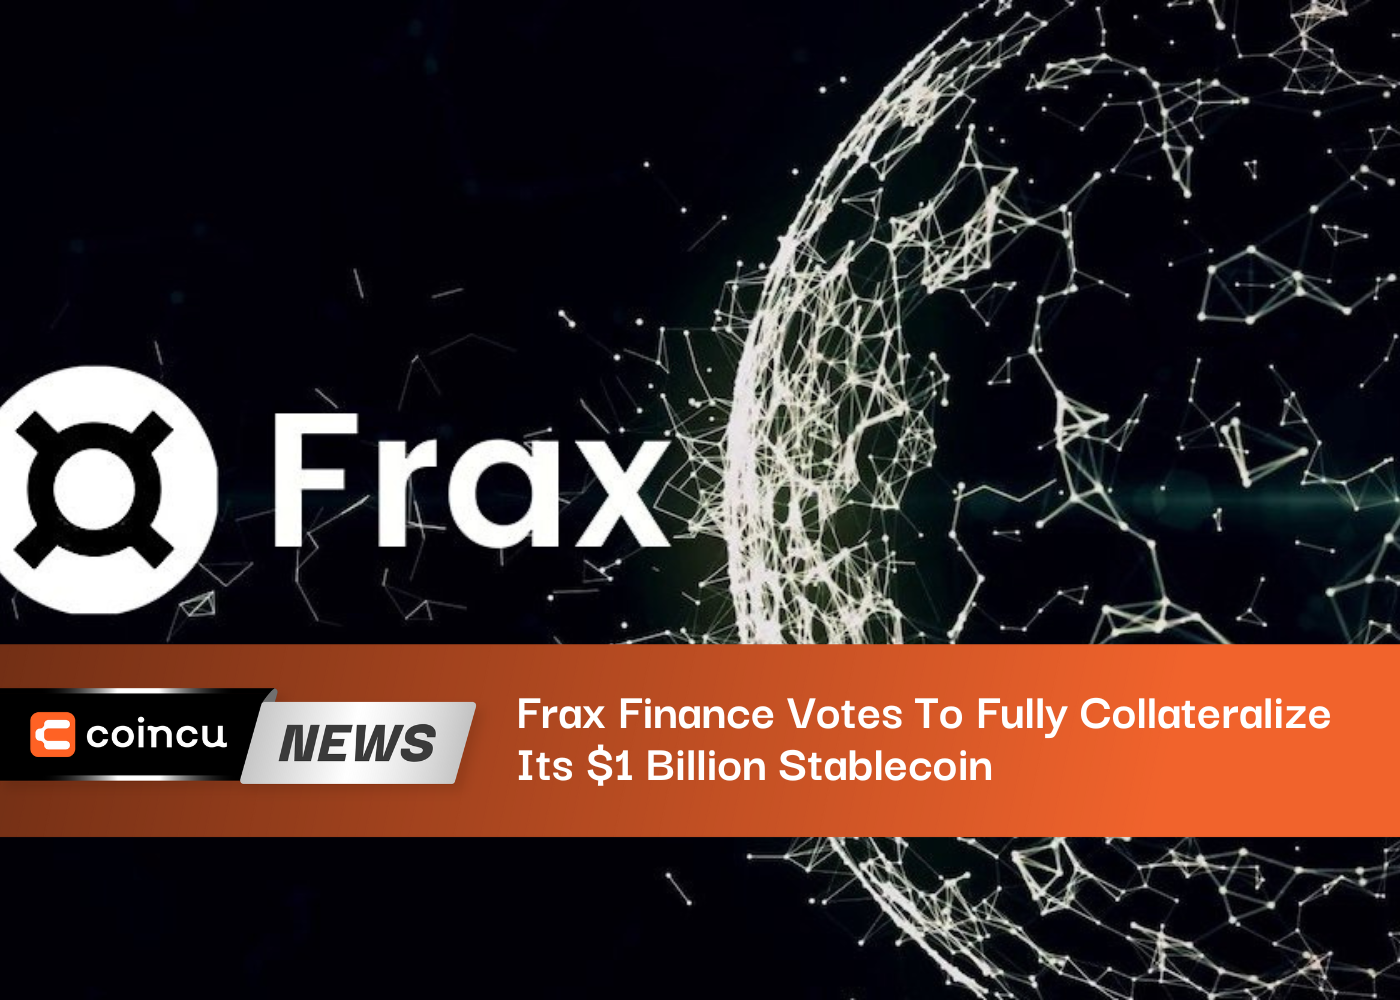 Frax Finance Votes To Fully Collateralize